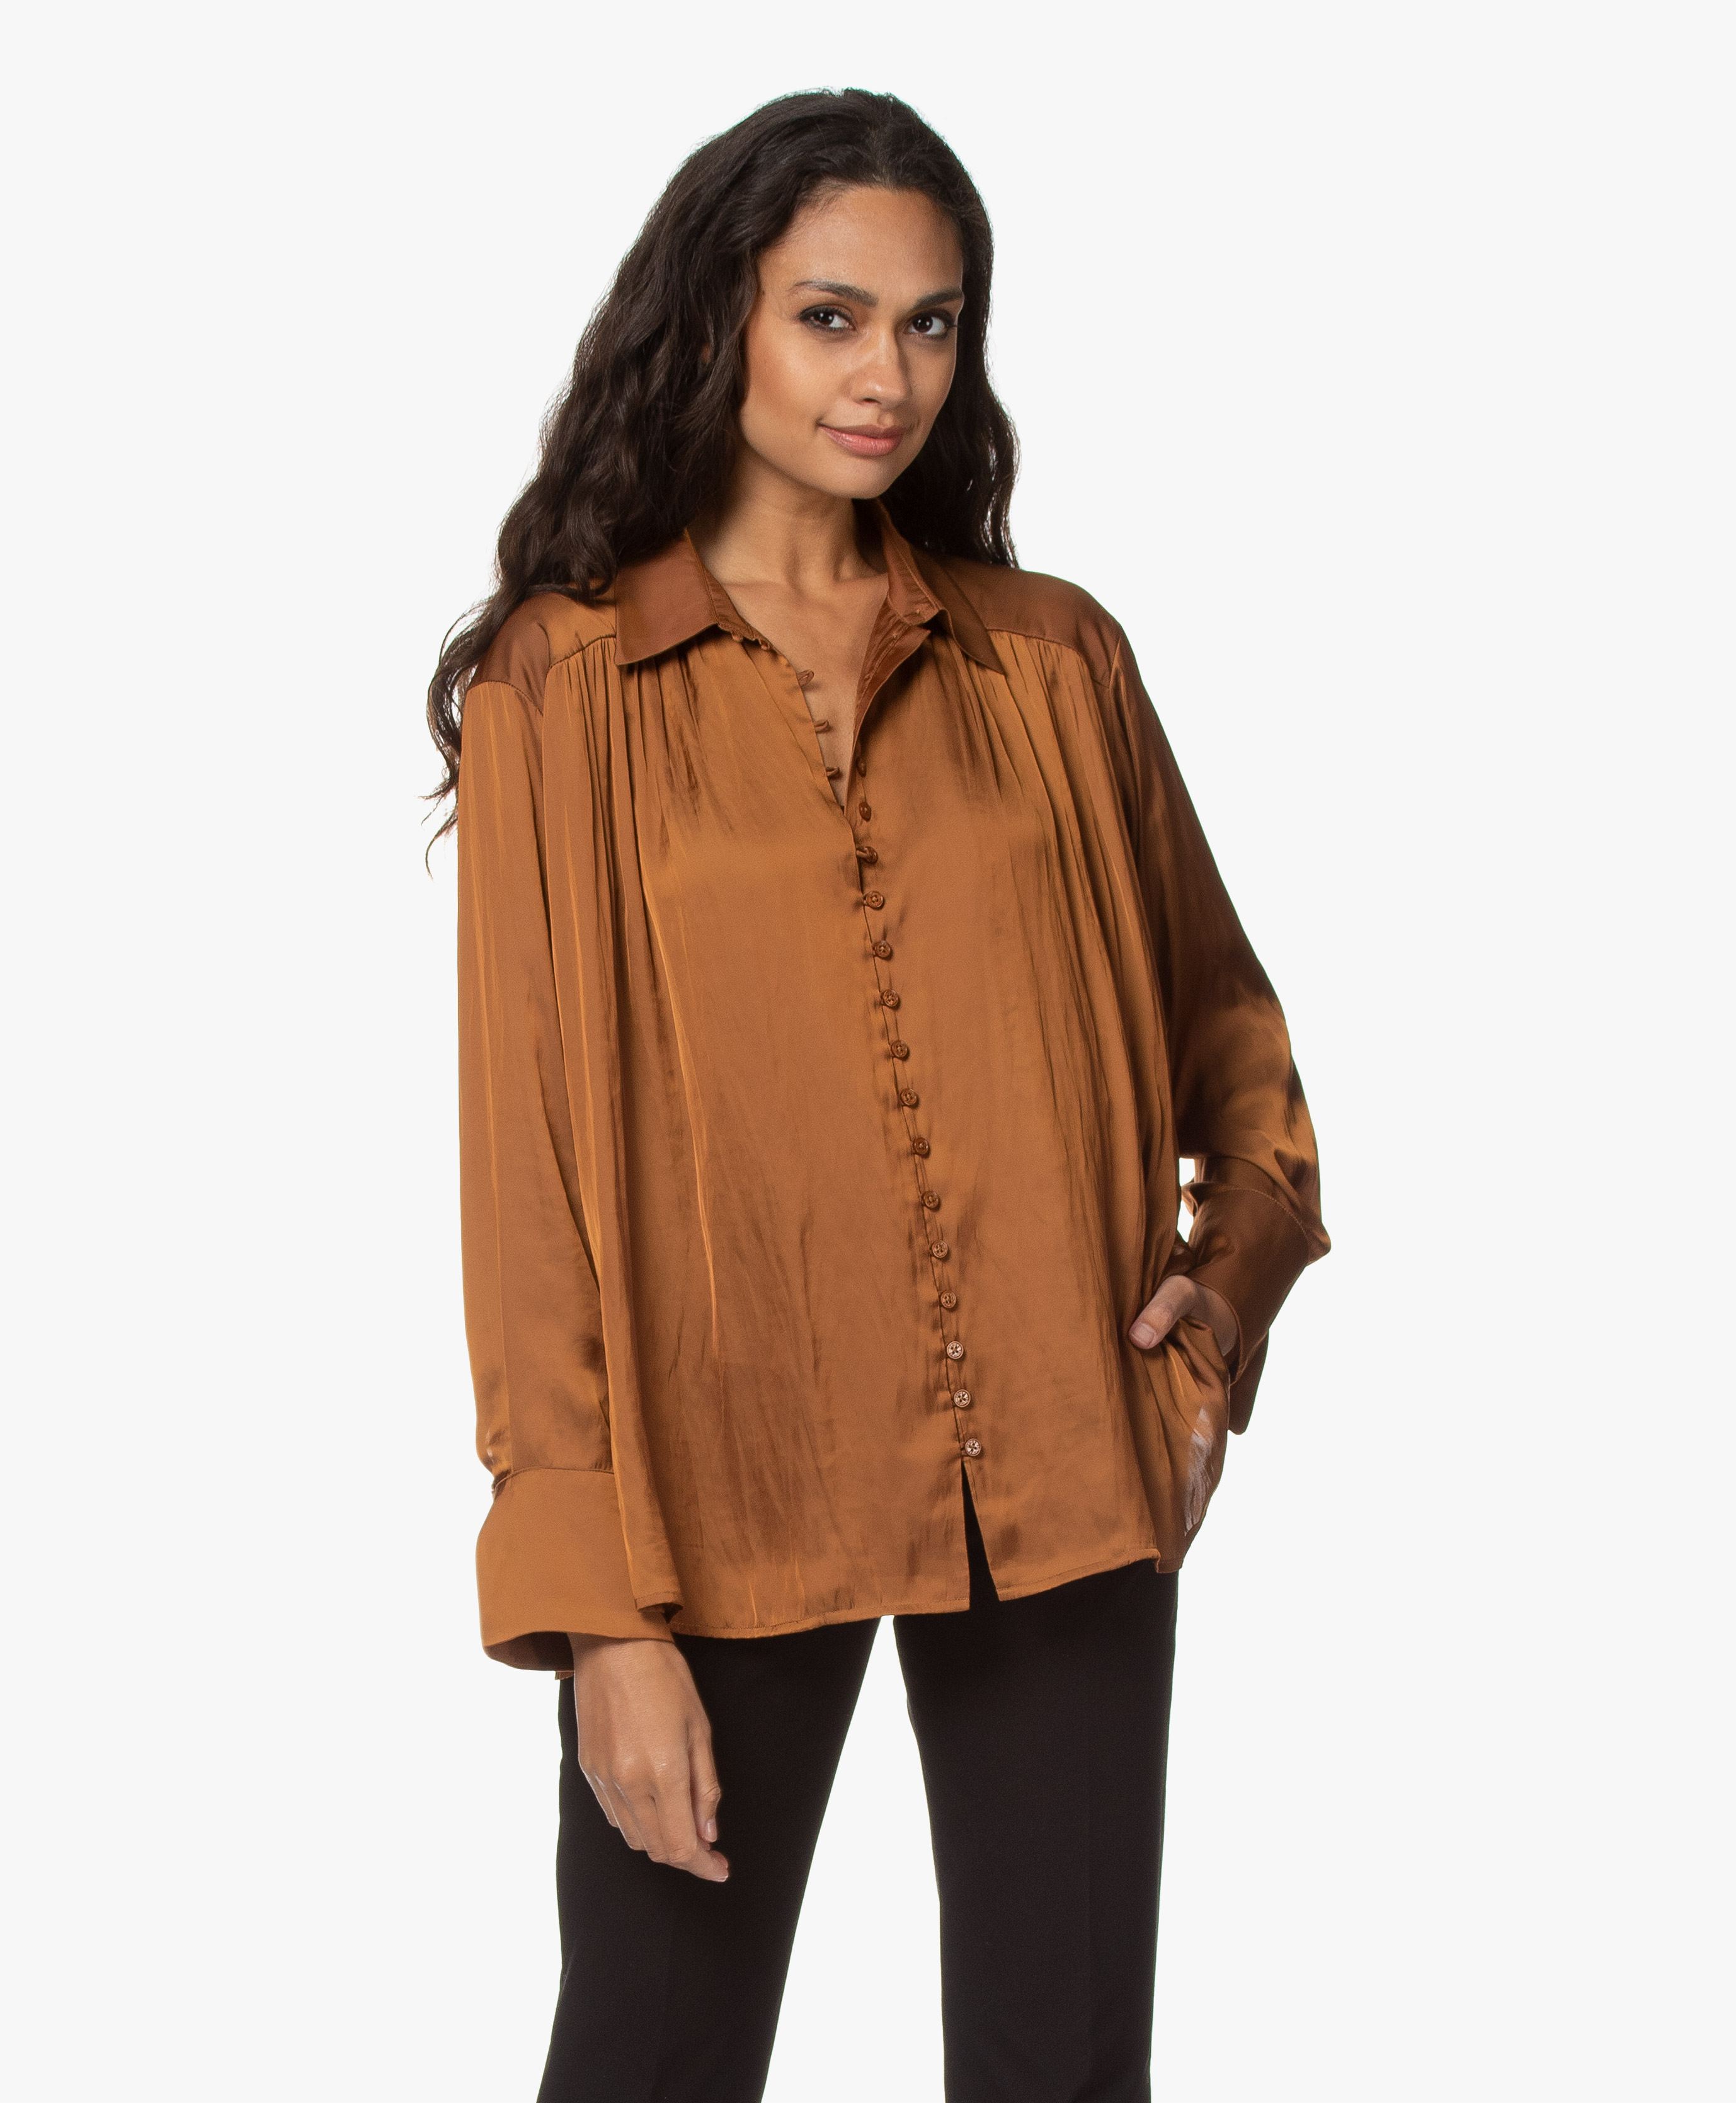 Zadig & Voltaire Trent Satin Blouse - Ocre - trent satin | wjcp0509f ocre